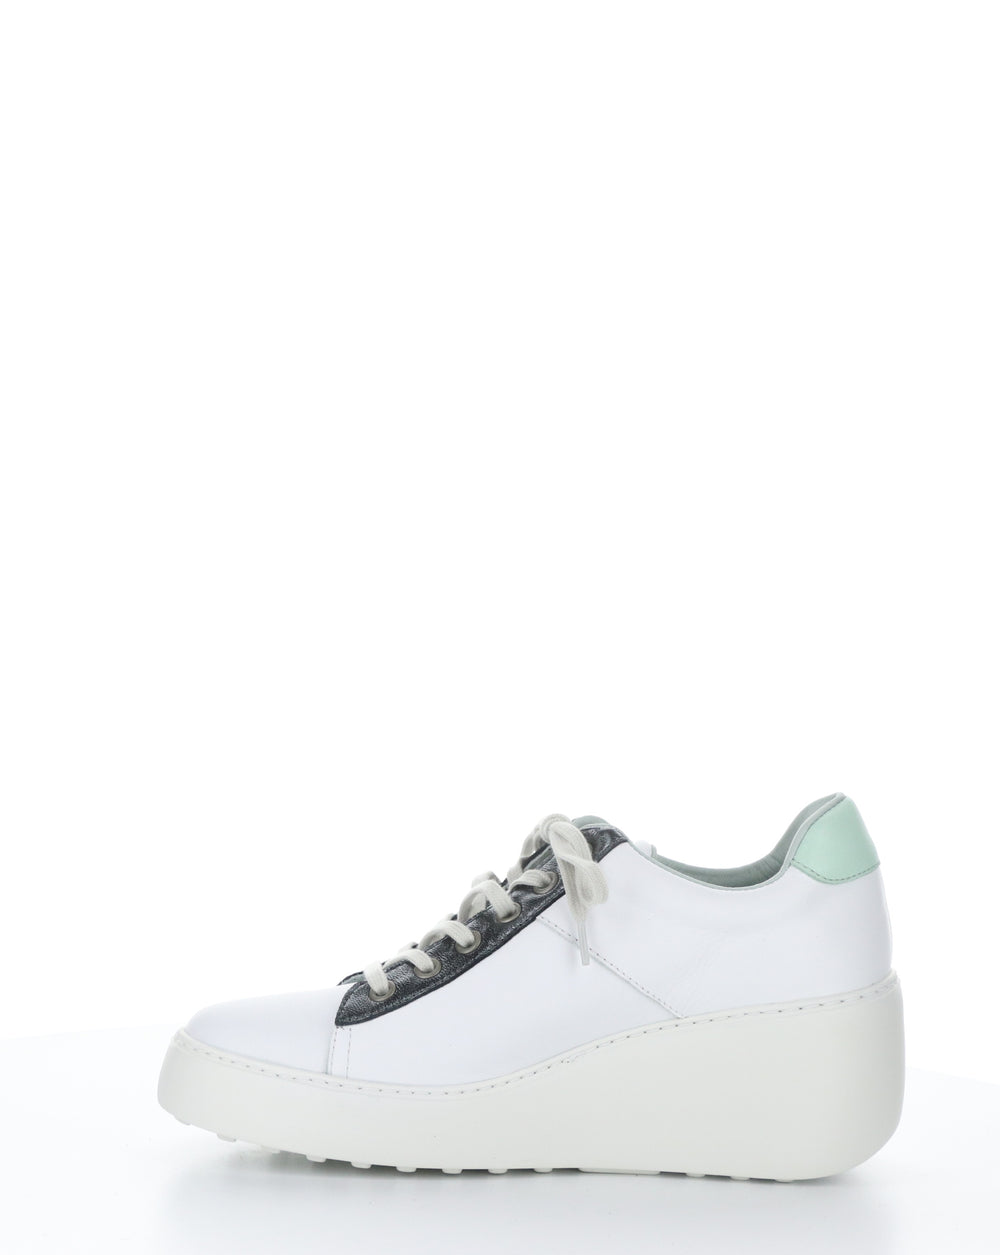 DELF580FLY 001 WHITE/GRAPH/MYNT Lace-up Shoes